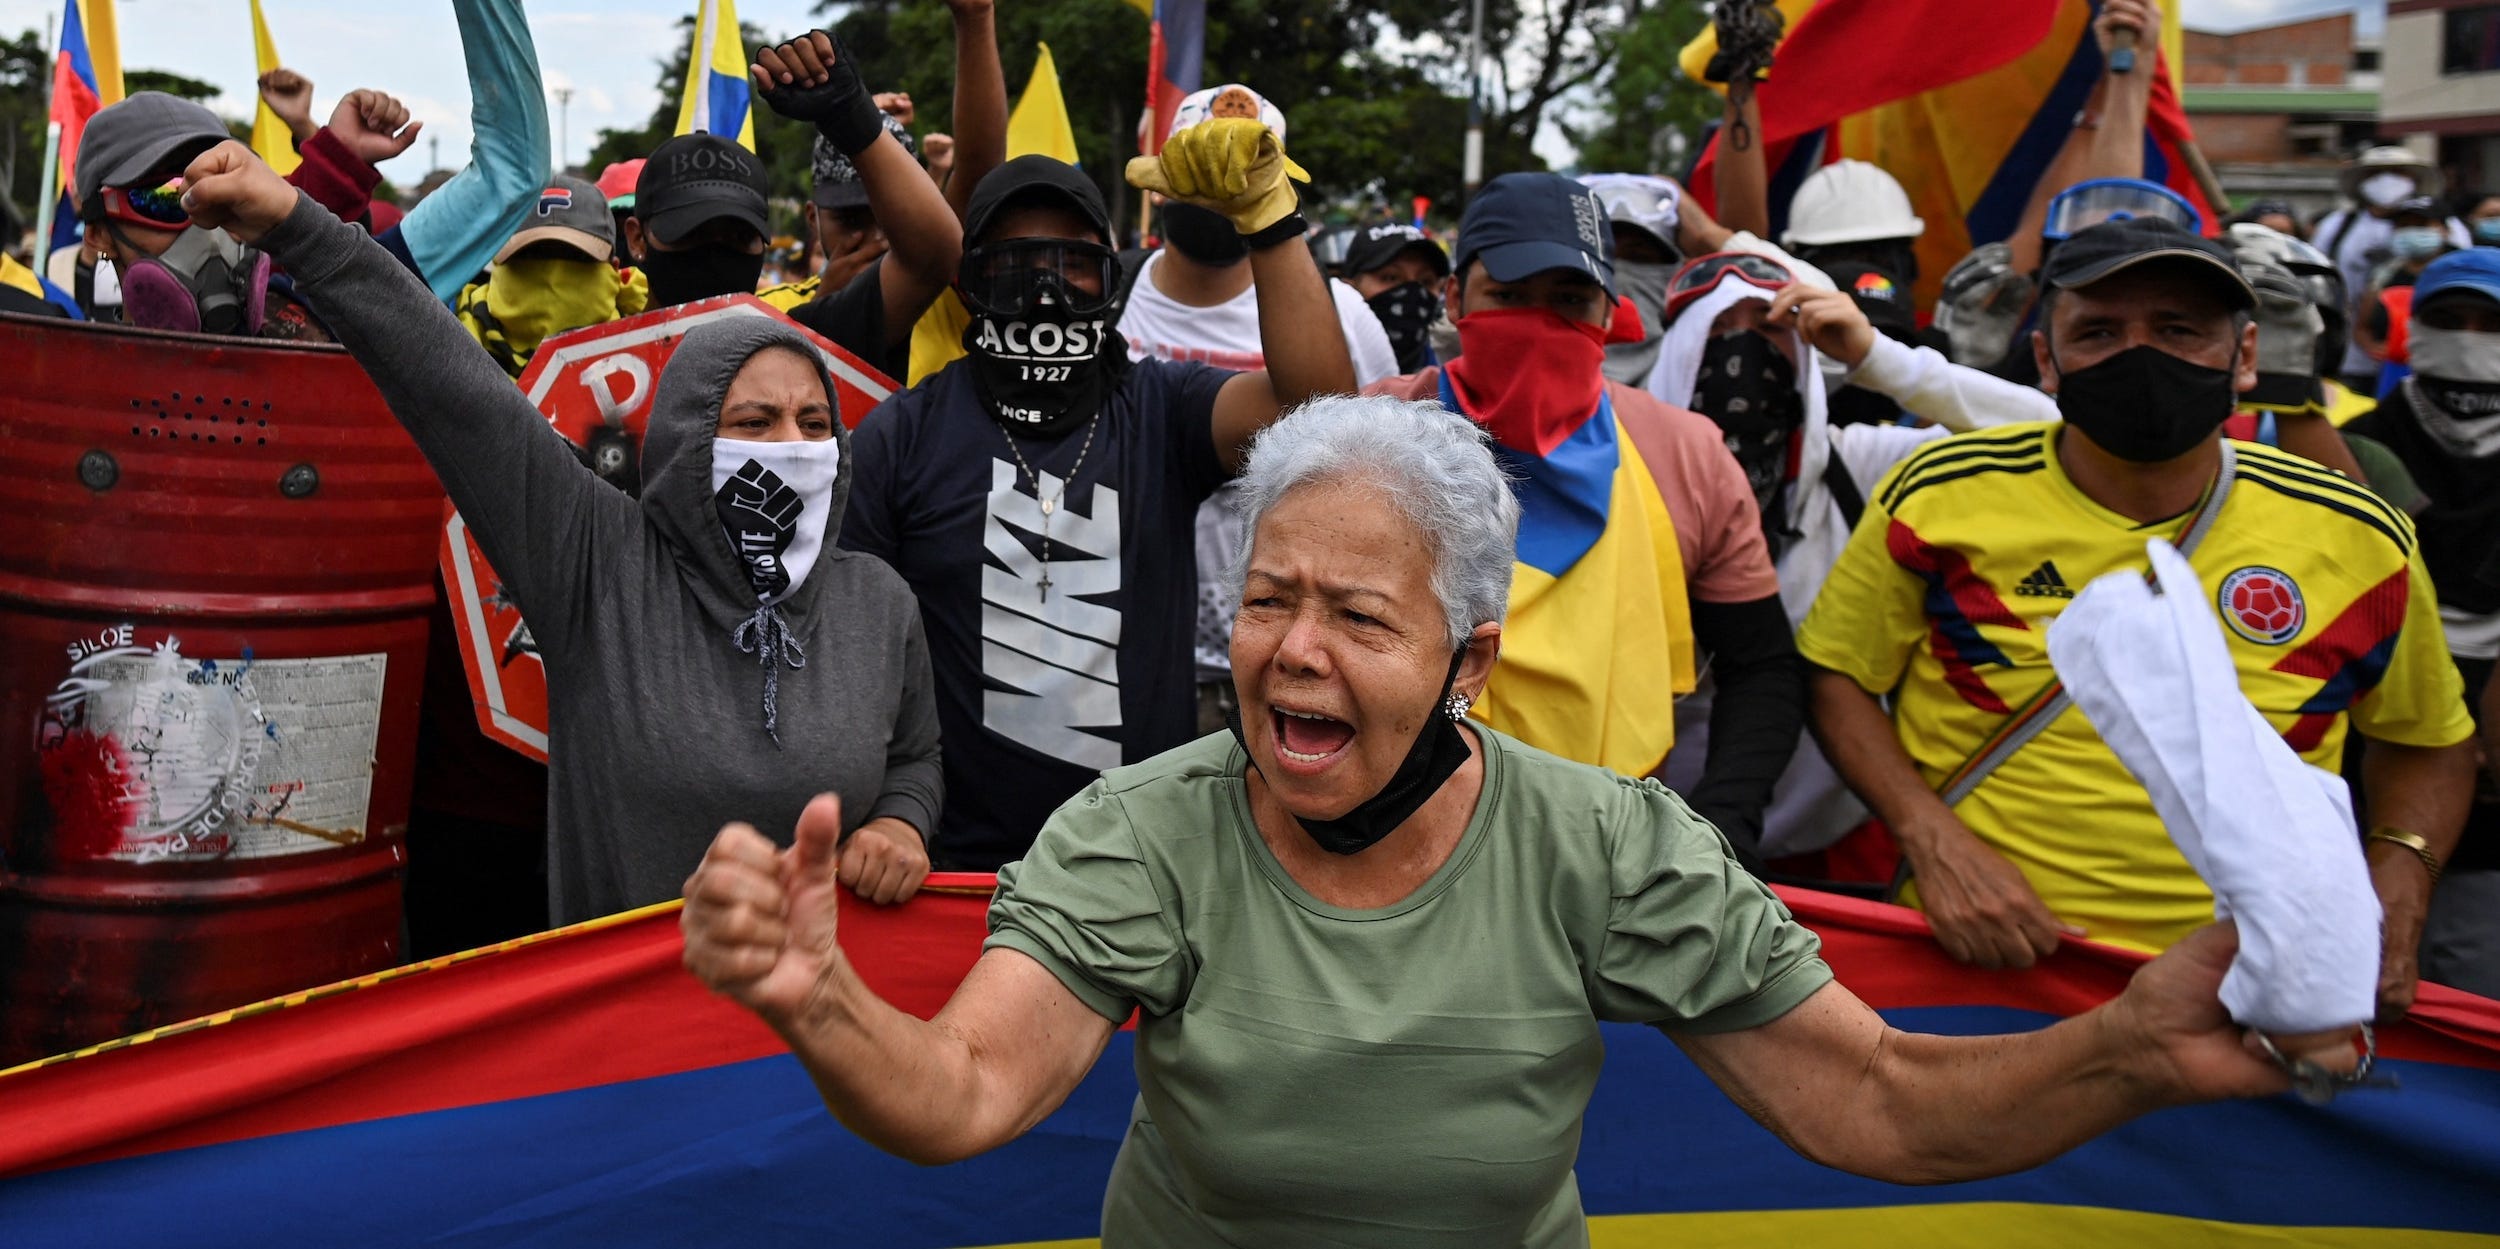 People take part in a new protest against the government of Colombian President Ivan Duque, in Cali, Colombia, on May 19, 2021.